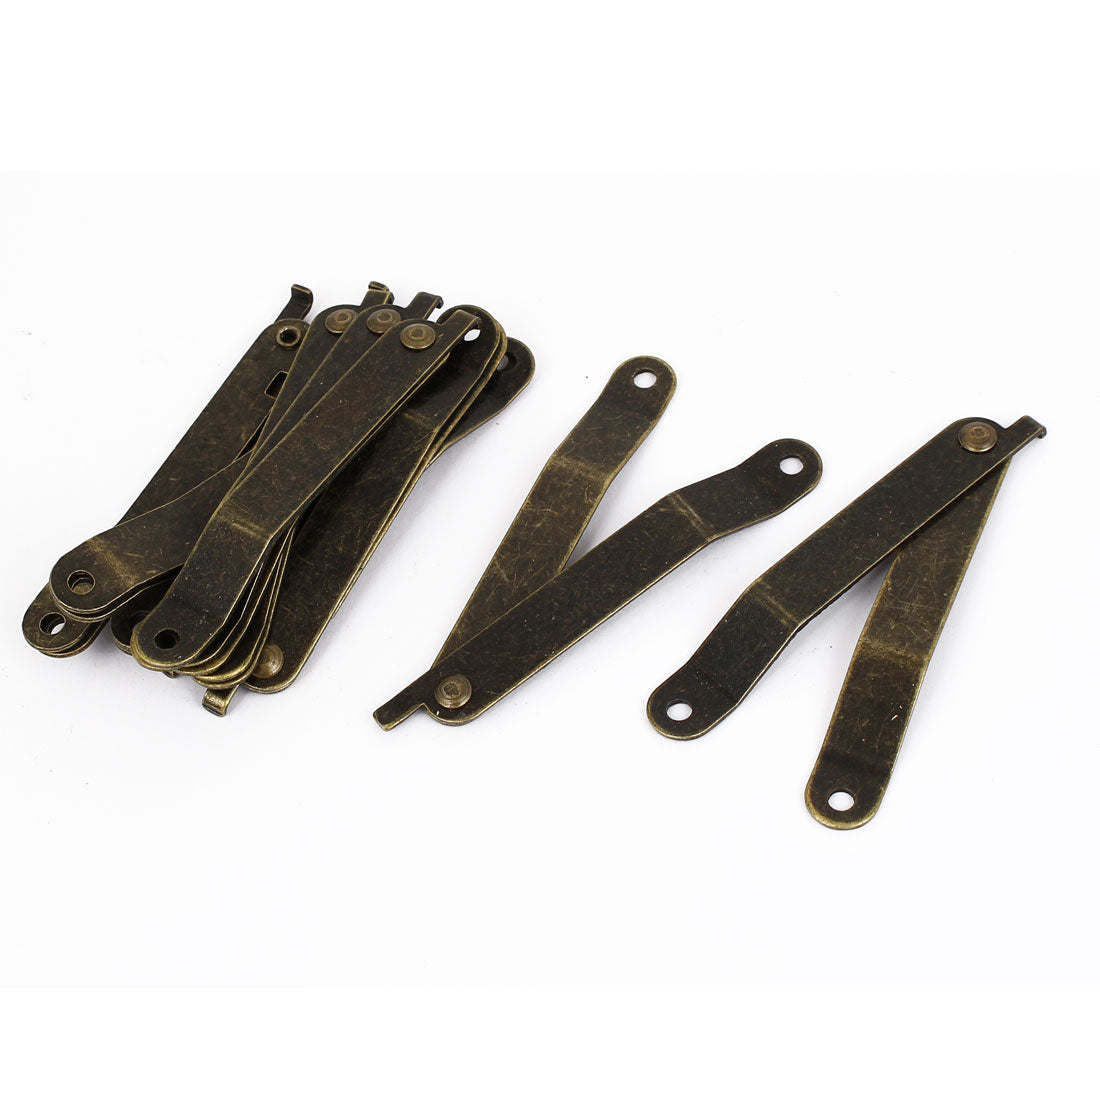 uxcell Uxcell 10pcs Furniture Box Rotatable Folding Lid Support Hinge Bronze Tone 143mm Long